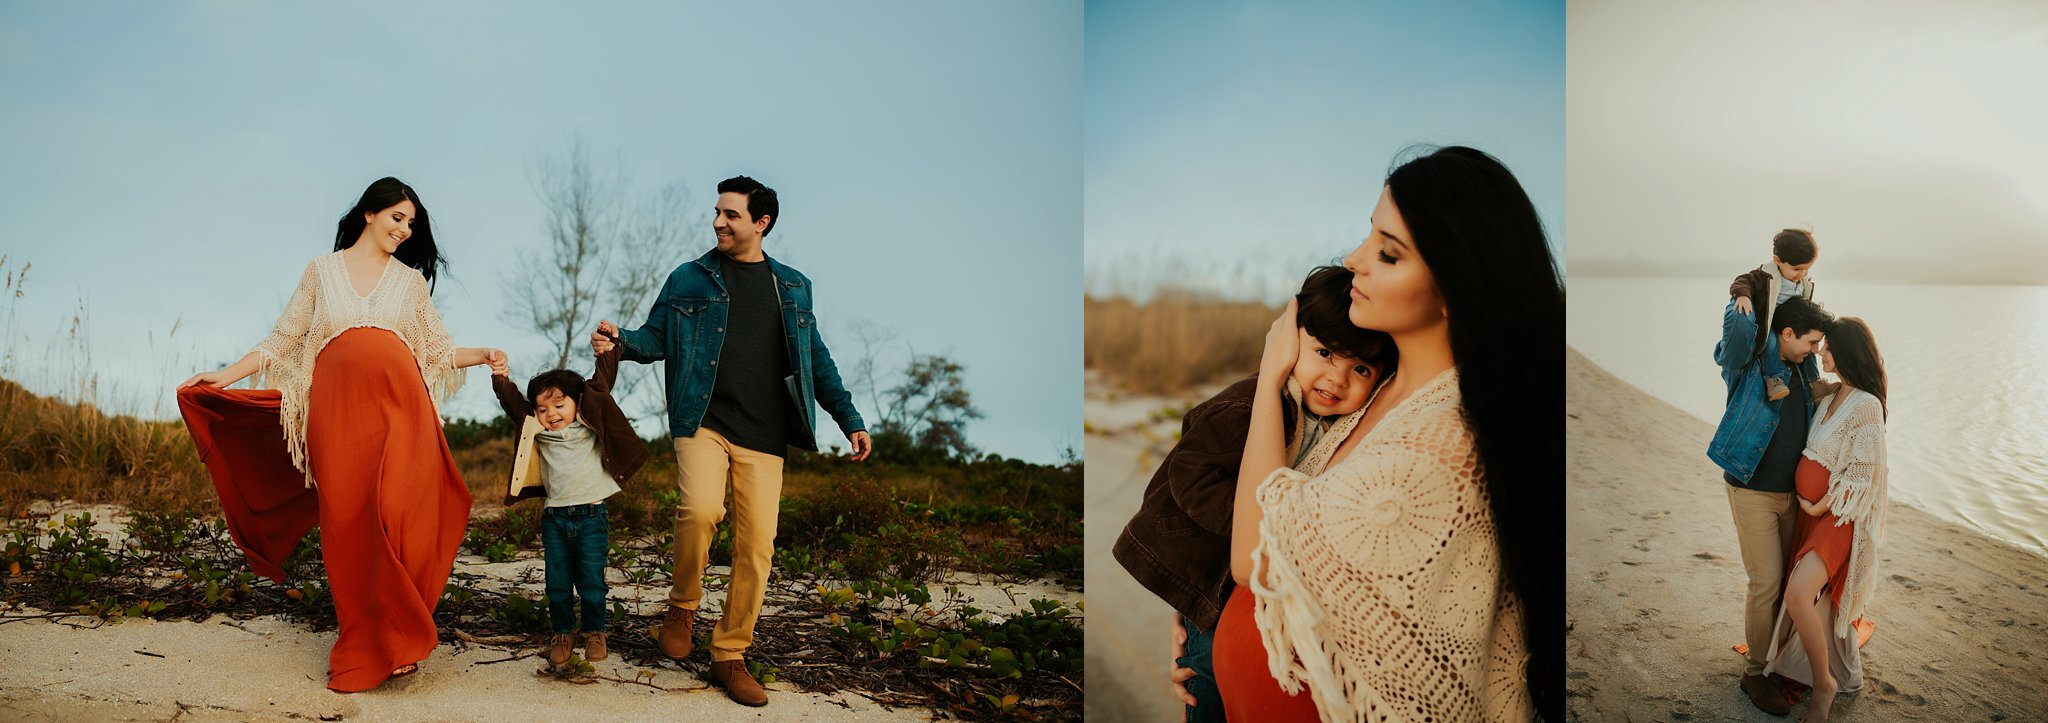 fun pregnancy portraits with family 